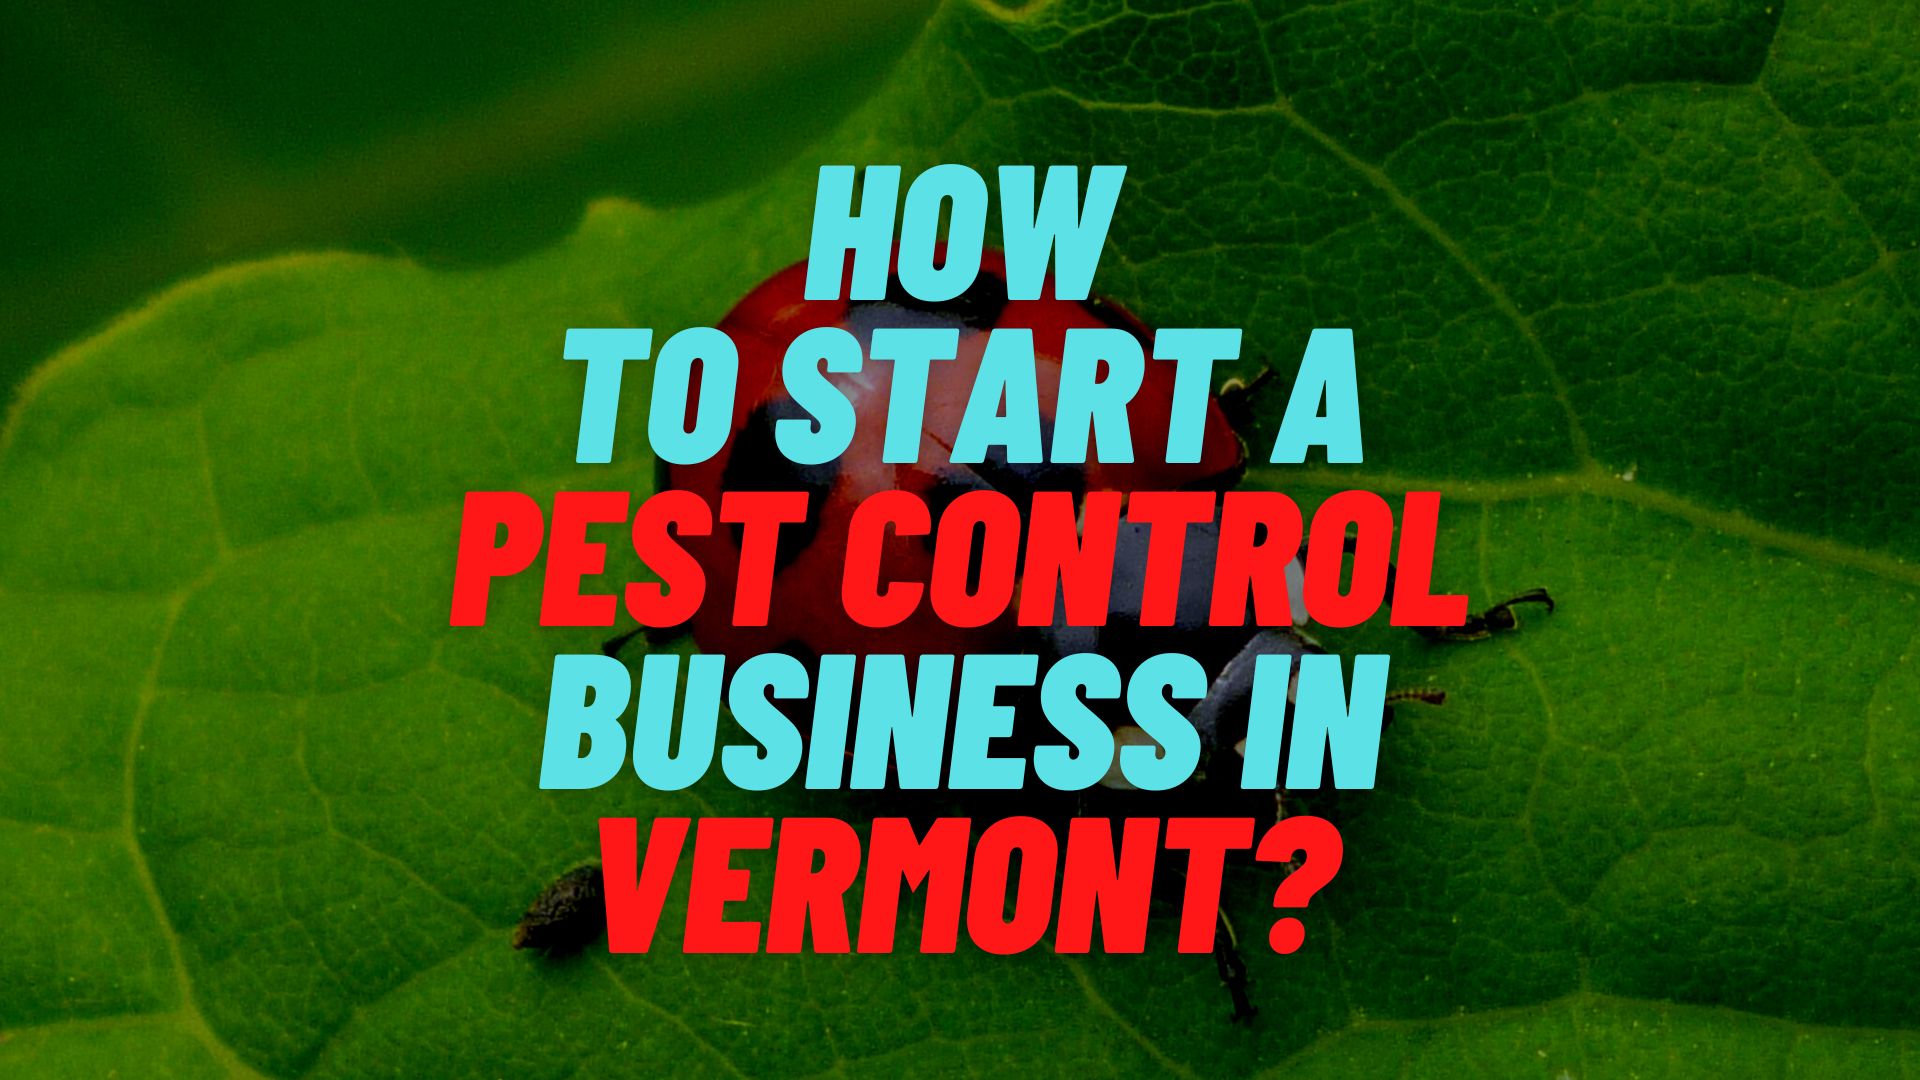 How to start a pest control business in Vermont?